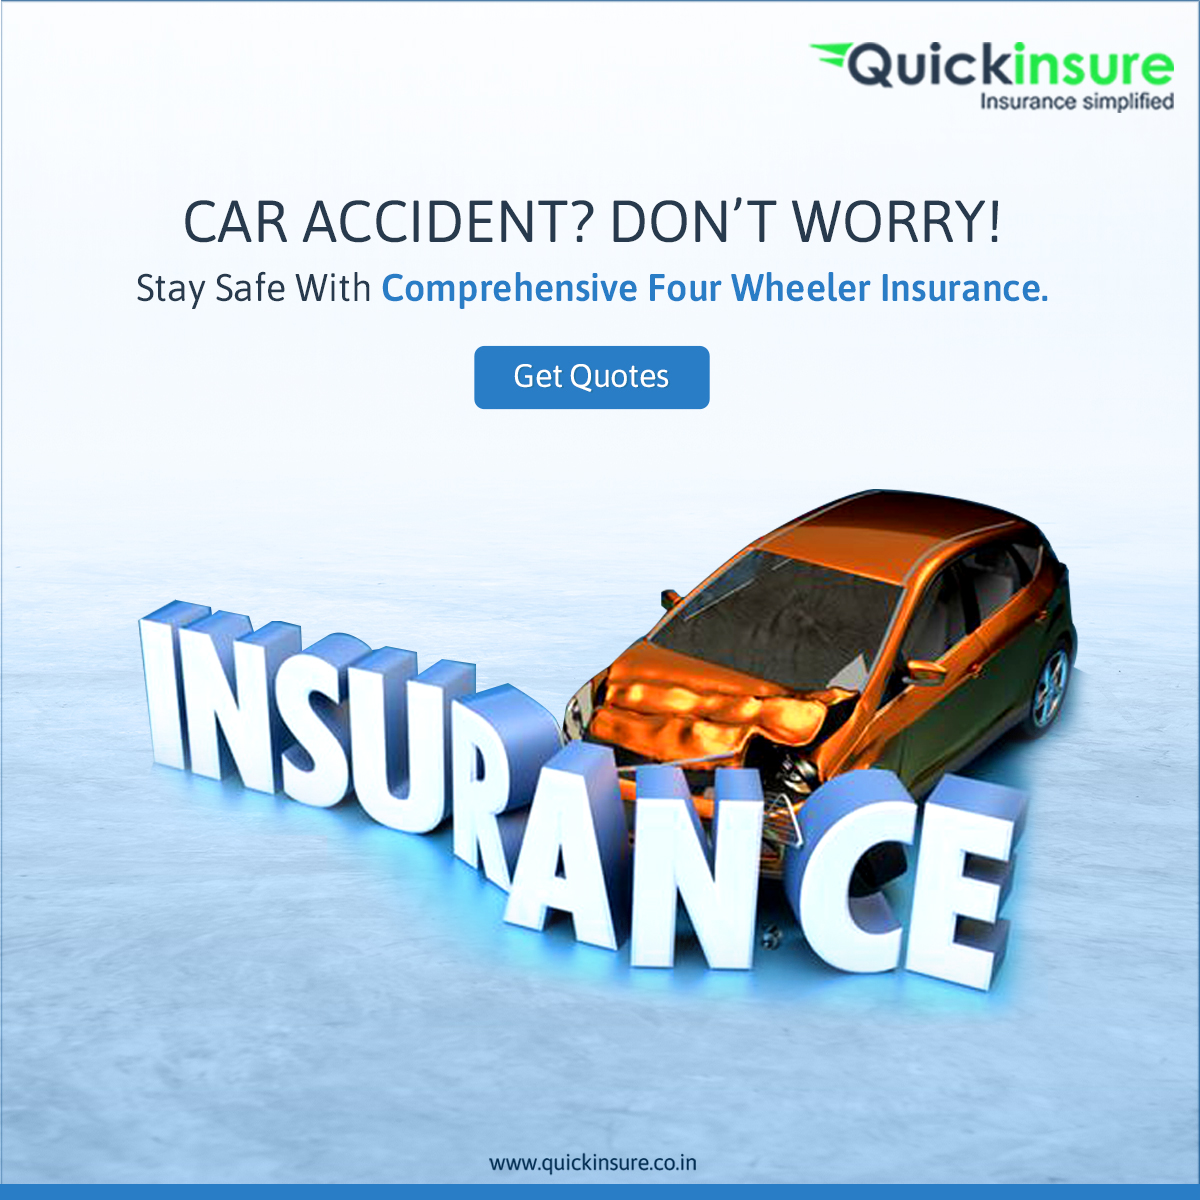 #CarAccident? Don’t worry! Stay Safe With Comprehensive #FourWheelerInsurance.
Visit us at bit.ly/44eSk1g to find the perfect policy tailored to your needs.
#CarInsurance #OnlineInsurance #BuyOnline #Insurance #TuesdayFeeling #TrendingNow #Quickinsure